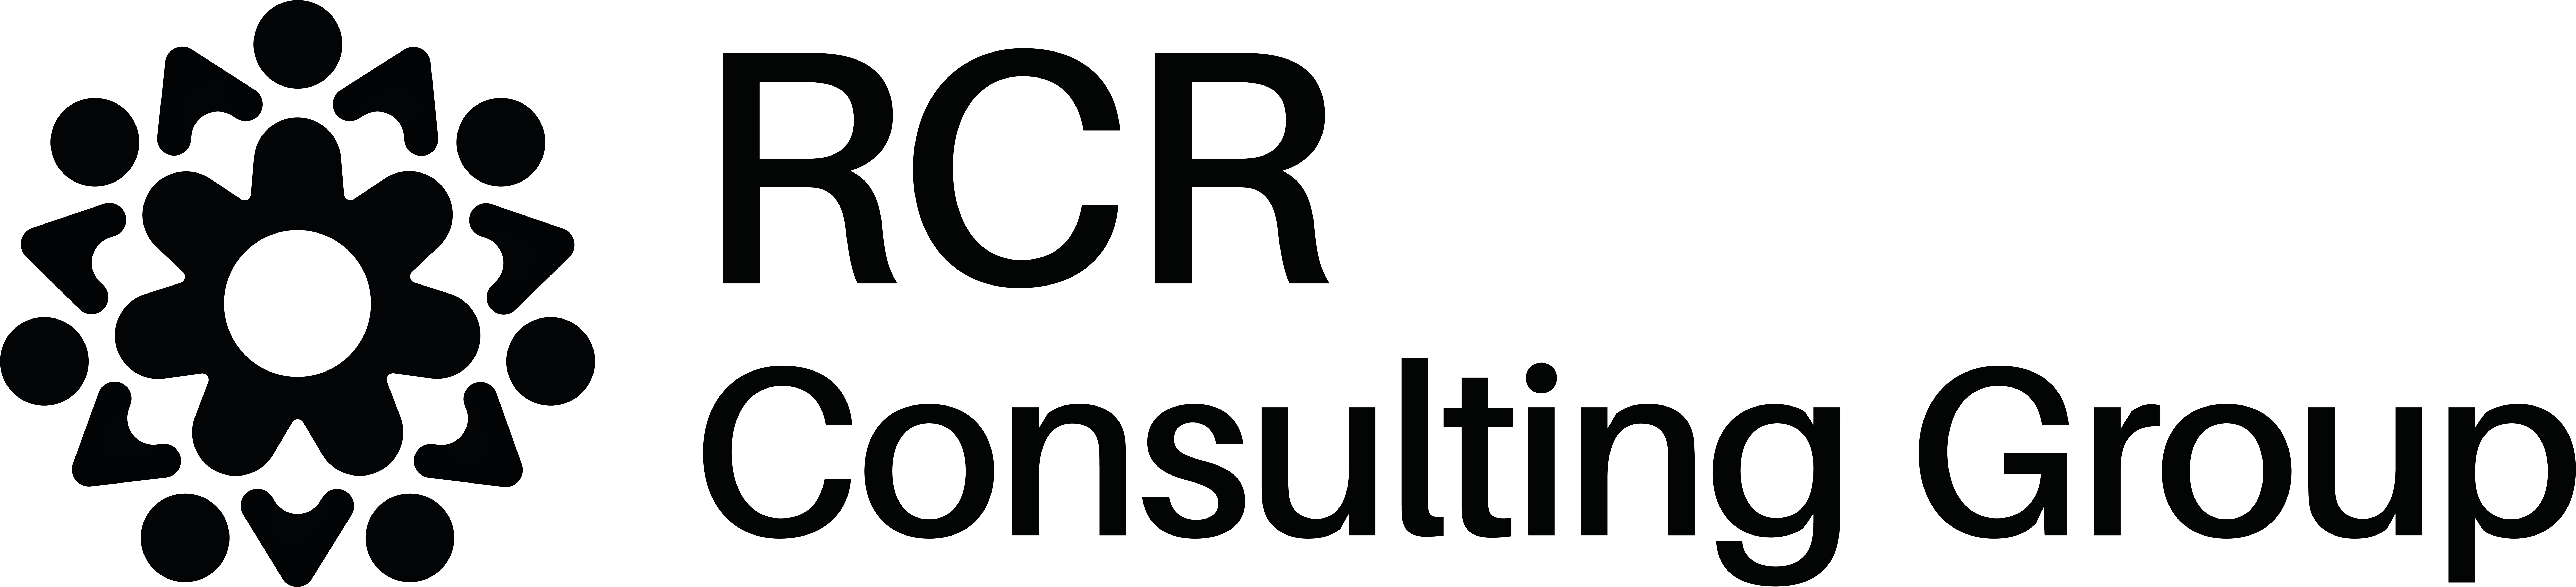 RCR Consulting Group